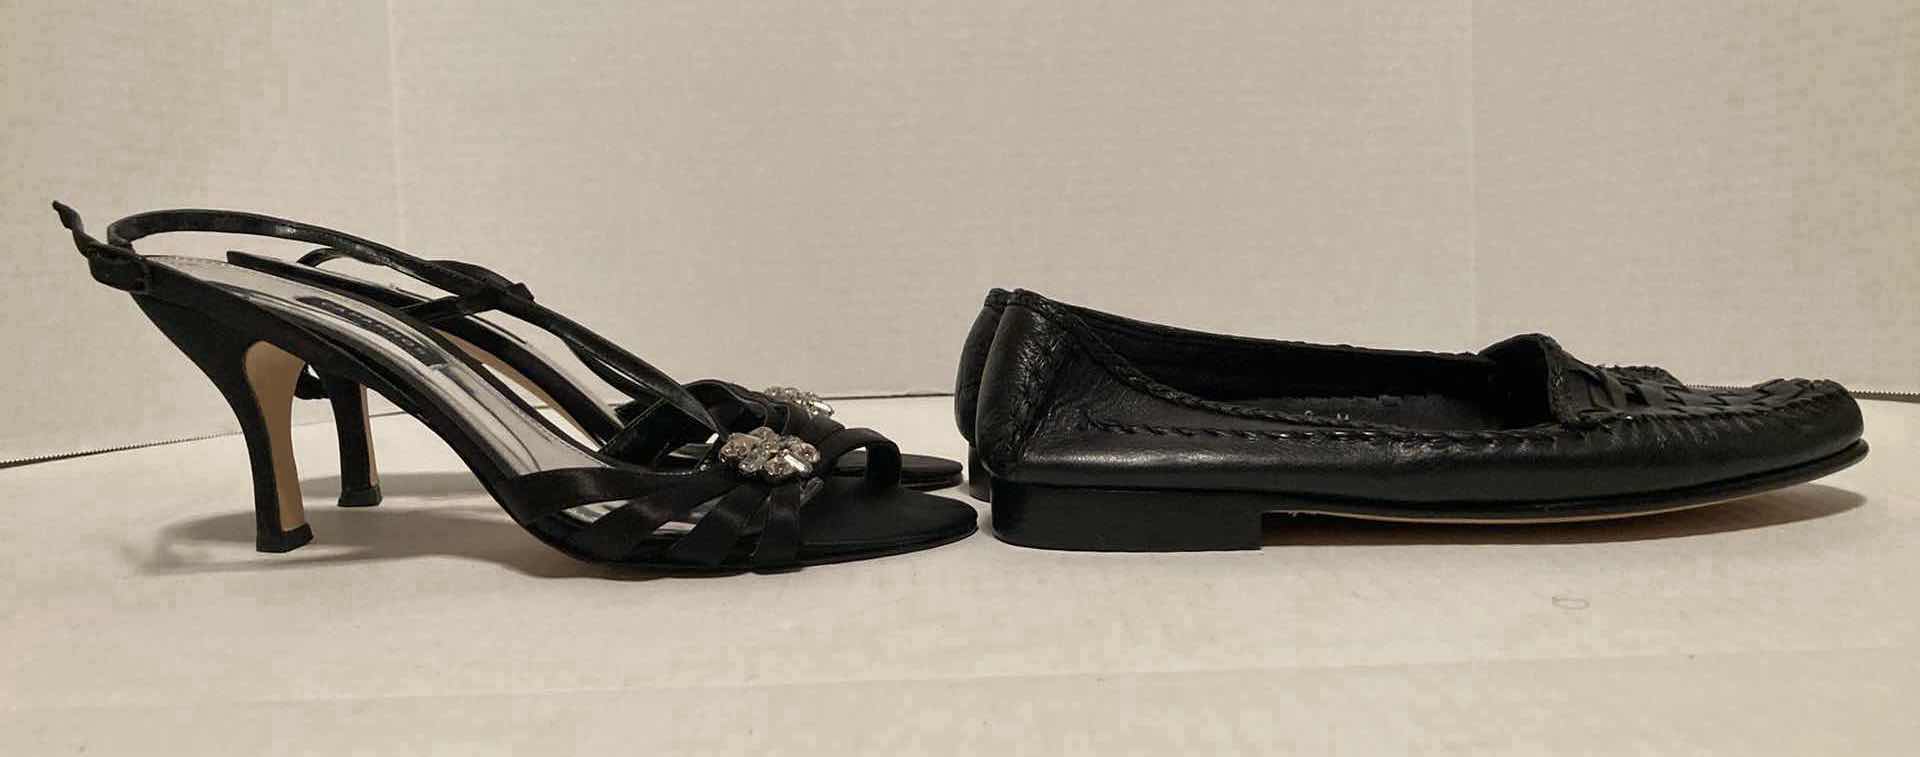 Photo 6 of CAPARROS BLACK OPEN TOE HEELS & COLE HAAN BLACK WOVEN LEATHER LOAFERS WOMEN’S SIZE 8-8.5